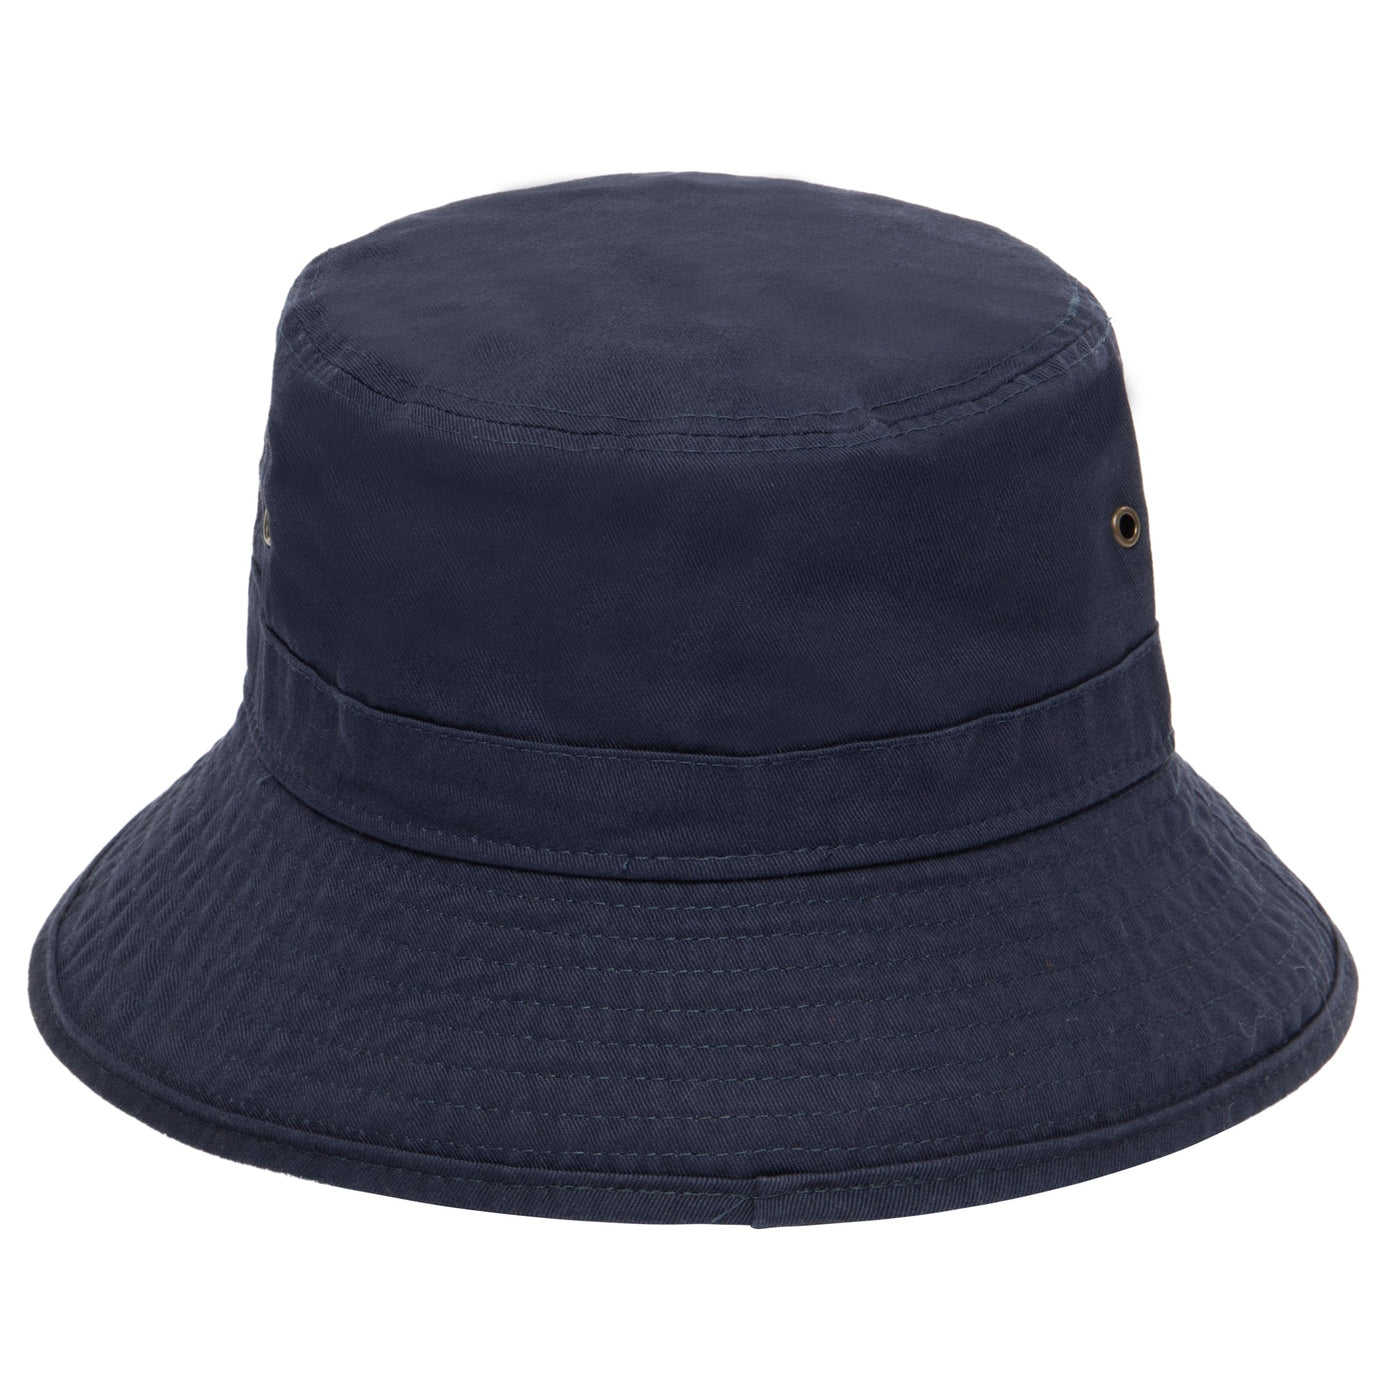 Men's washed cotton bucket with side grommets – San Diego Hat Company